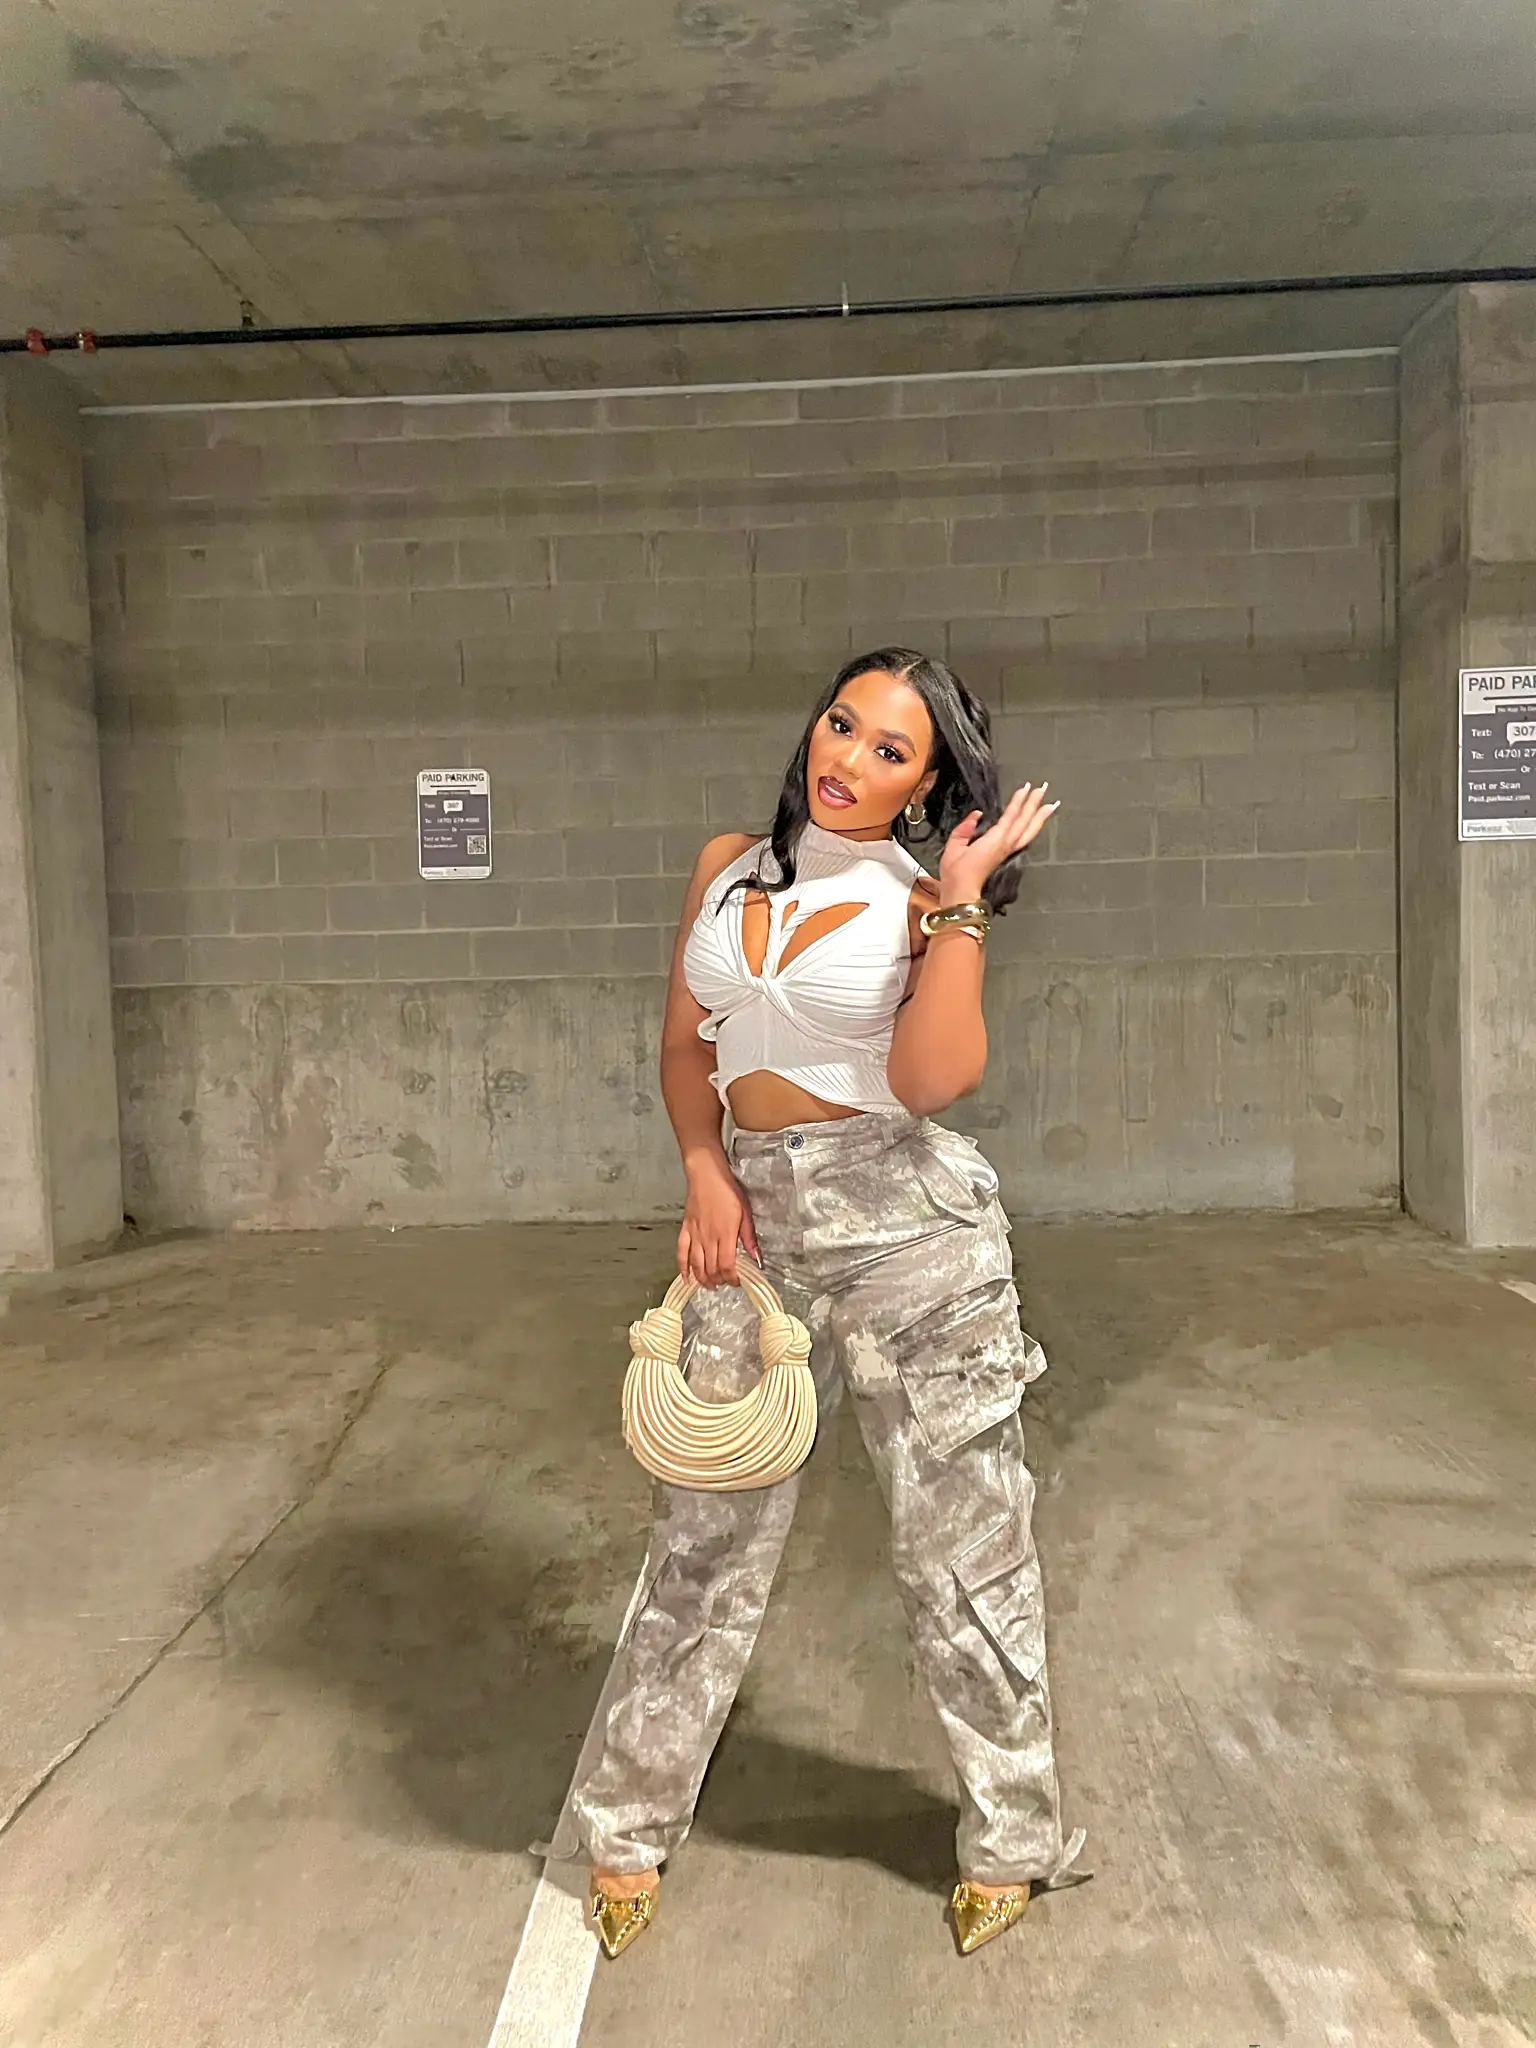 HOW YOU SHOULD STYLE CARGO PANTS🖤🪩